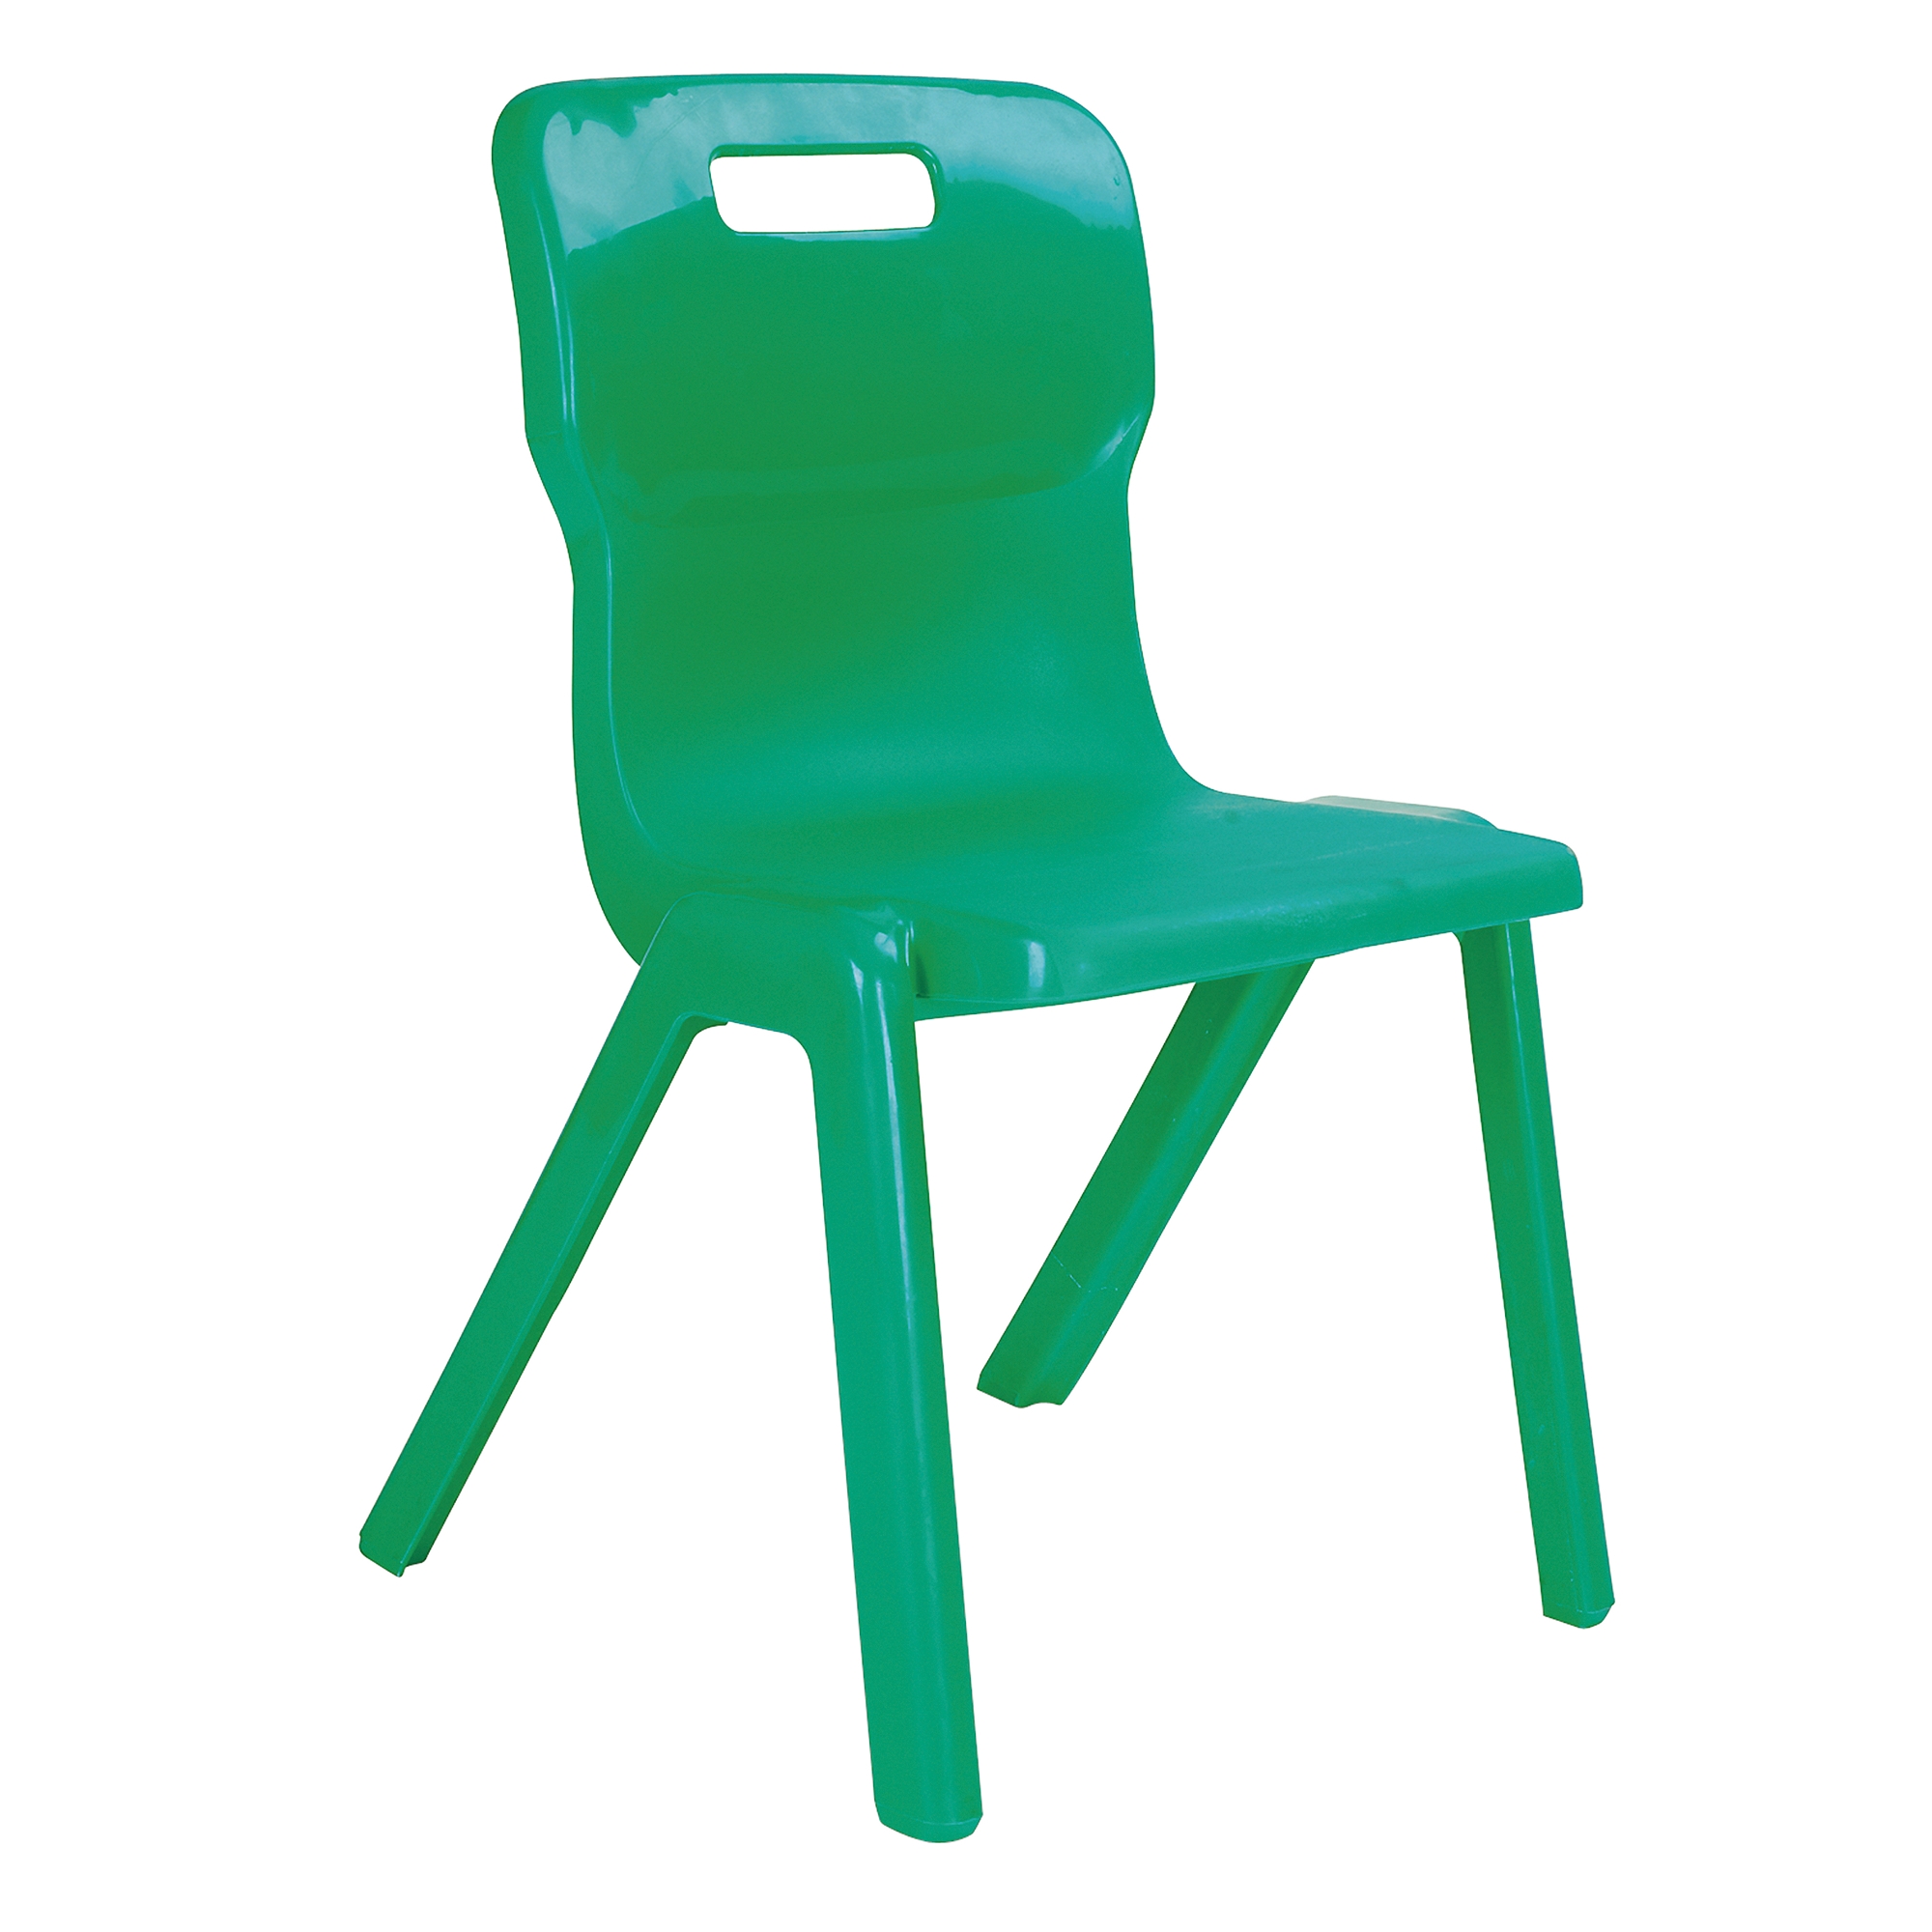 One Piece Titan Chair - Size 3 Ages 6-8 Green